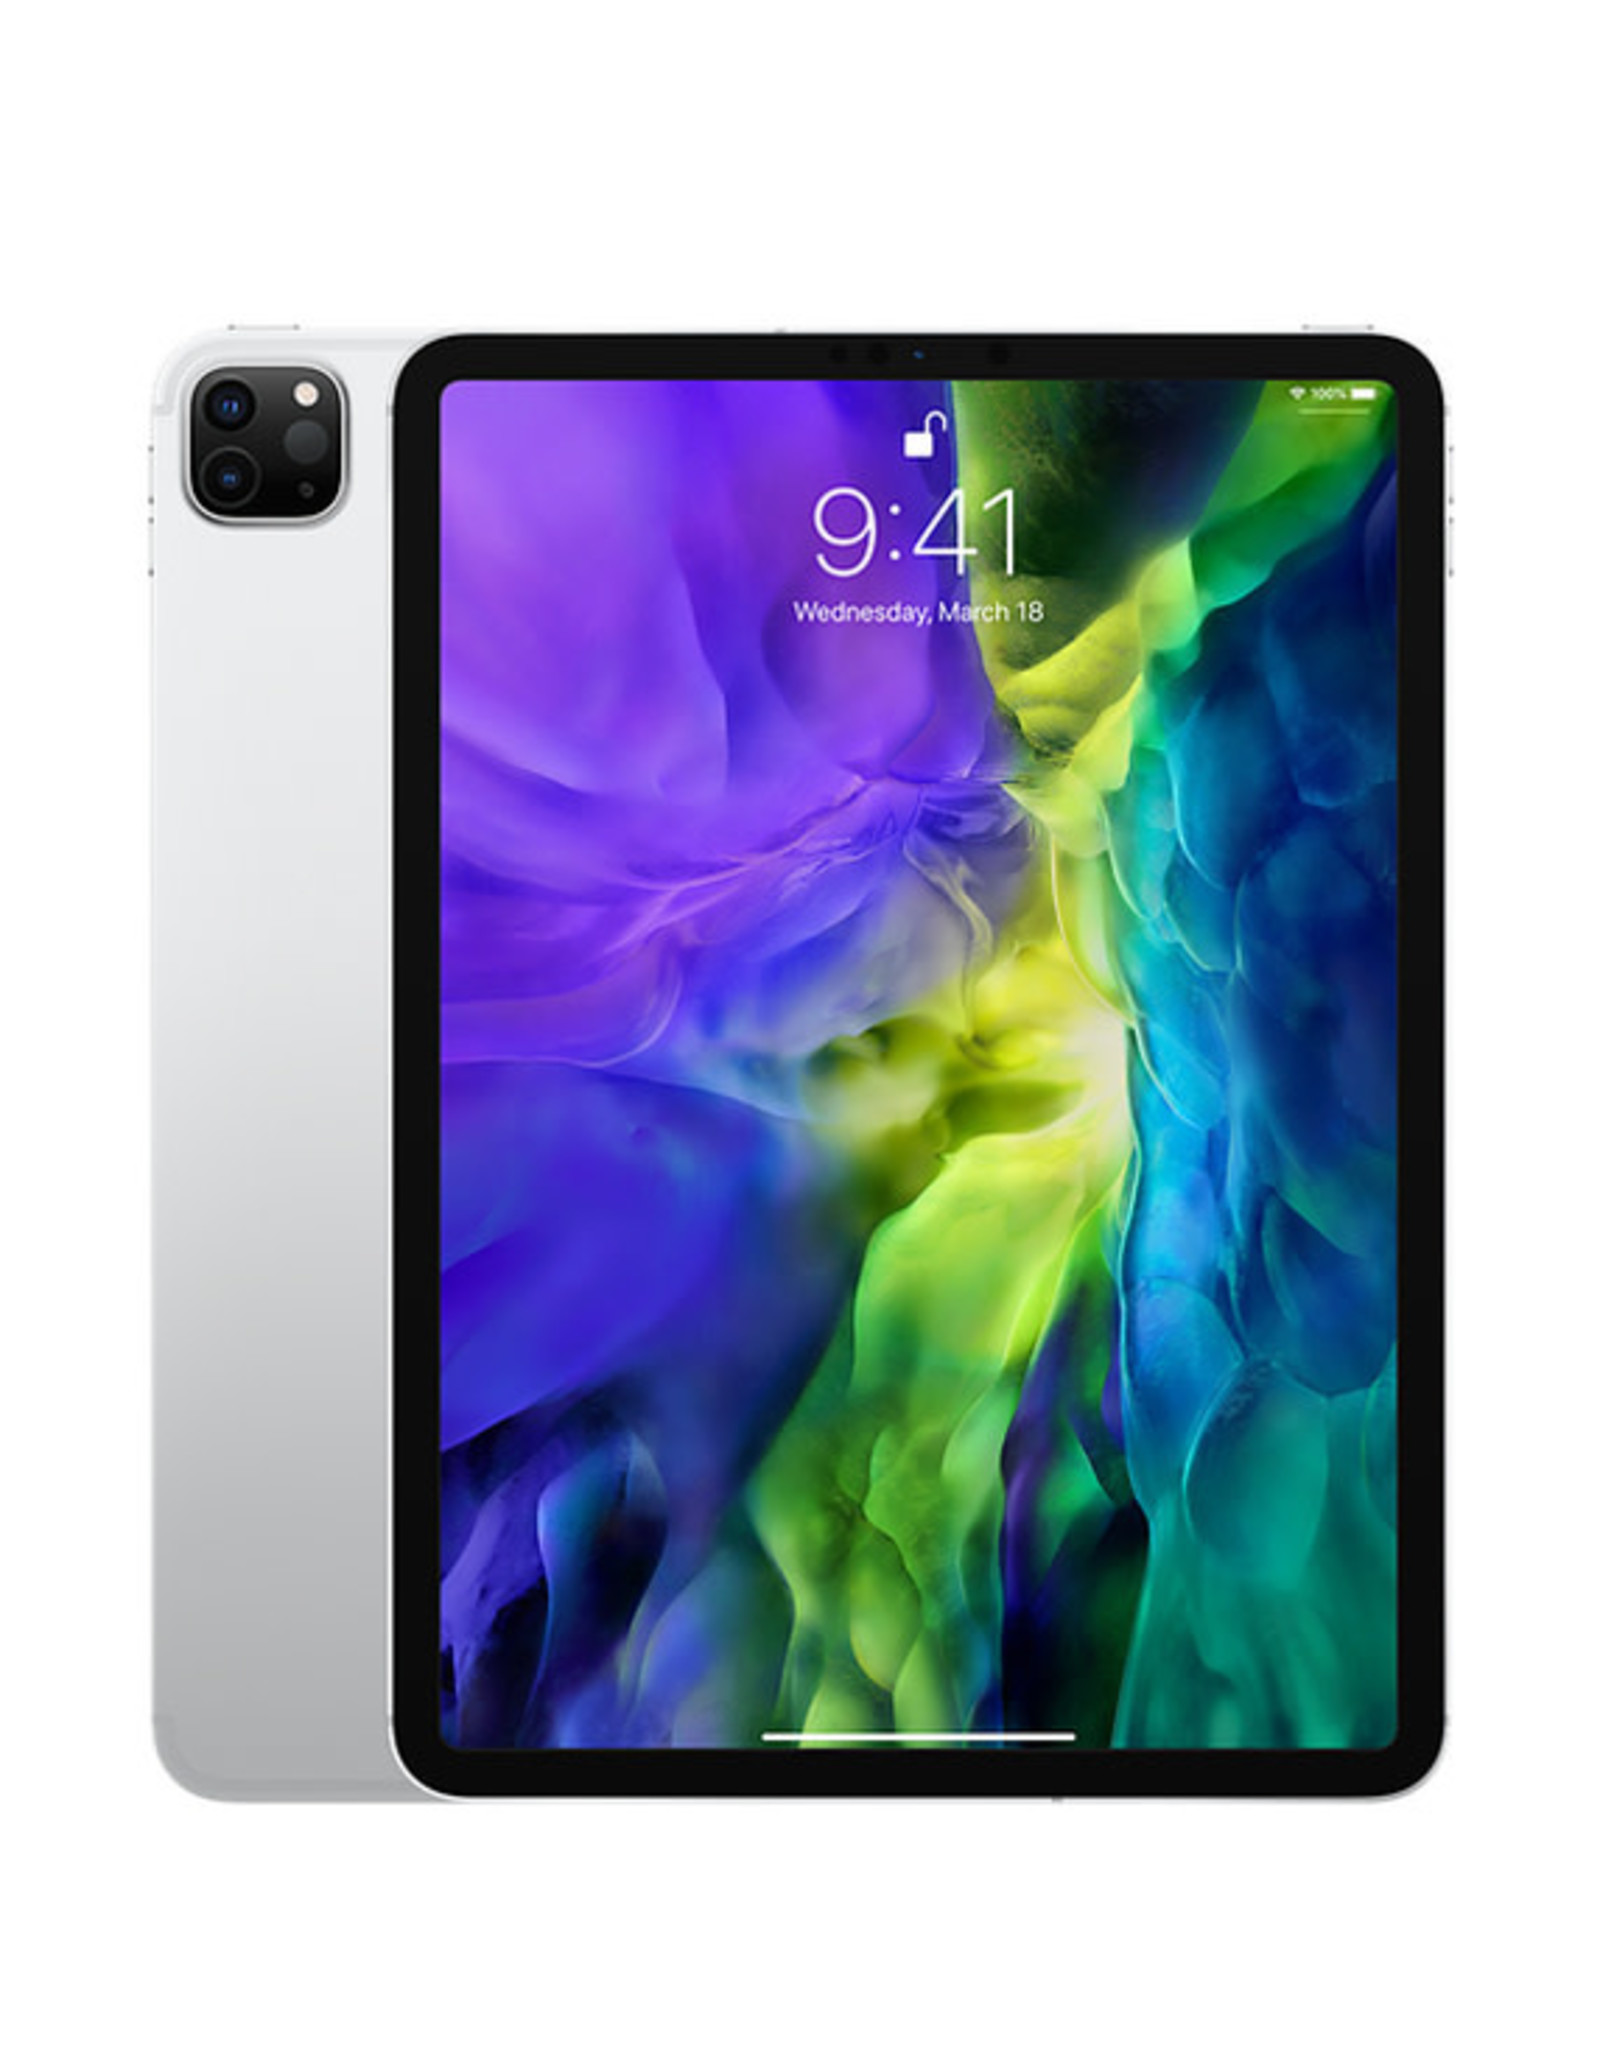 Apple 11-Inch iPad Pro (2nd Generation) with Wi-Fi